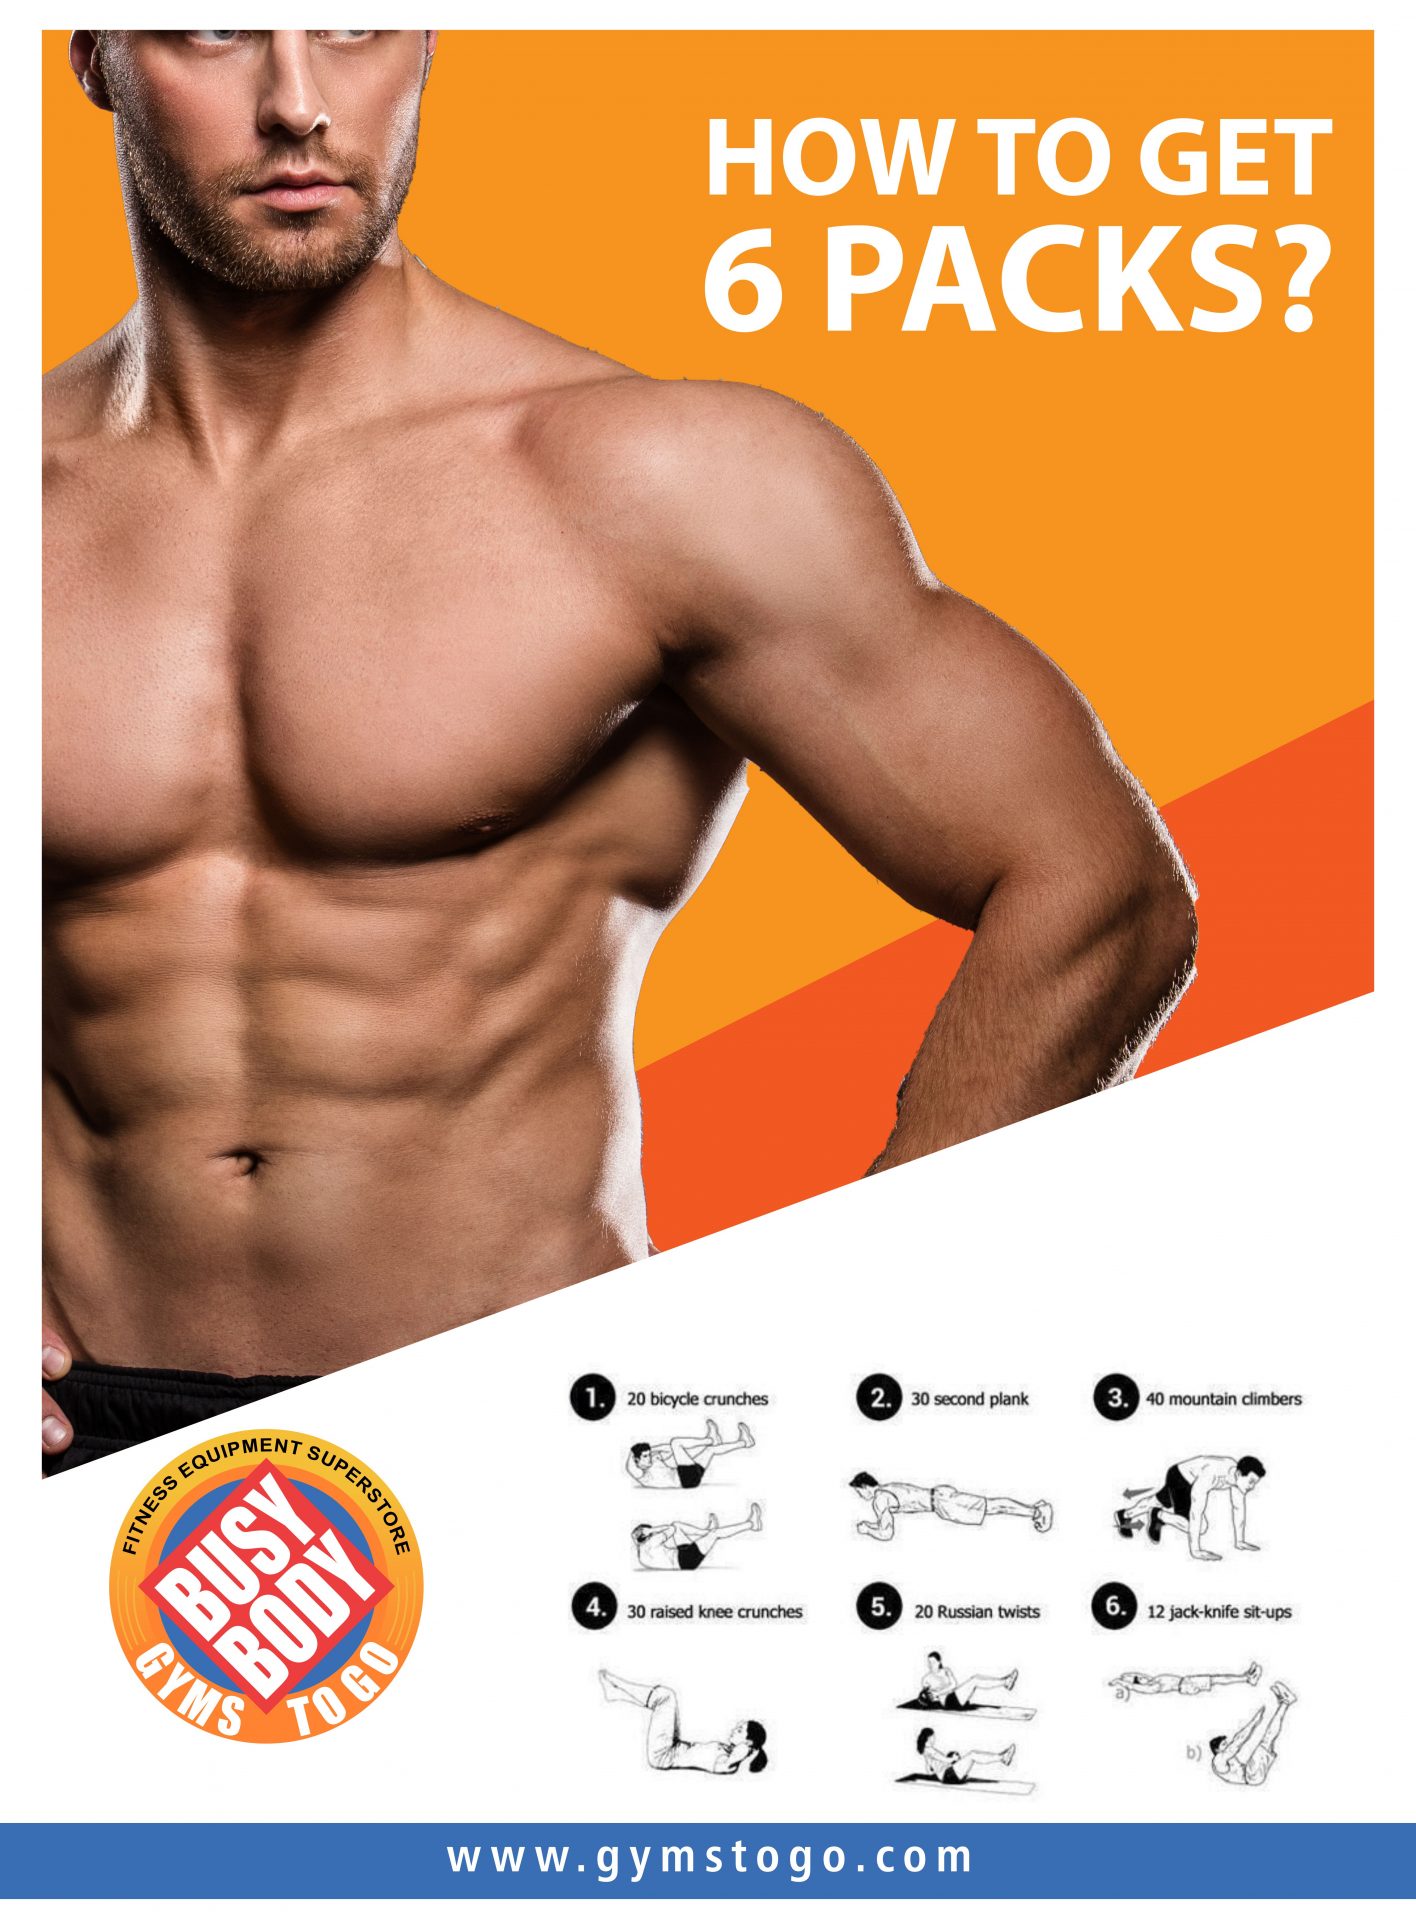 https://gymstogo.com/wp-content/uploads/2021/06/HOW-TO-GET-6-PACK-ABS.jpg